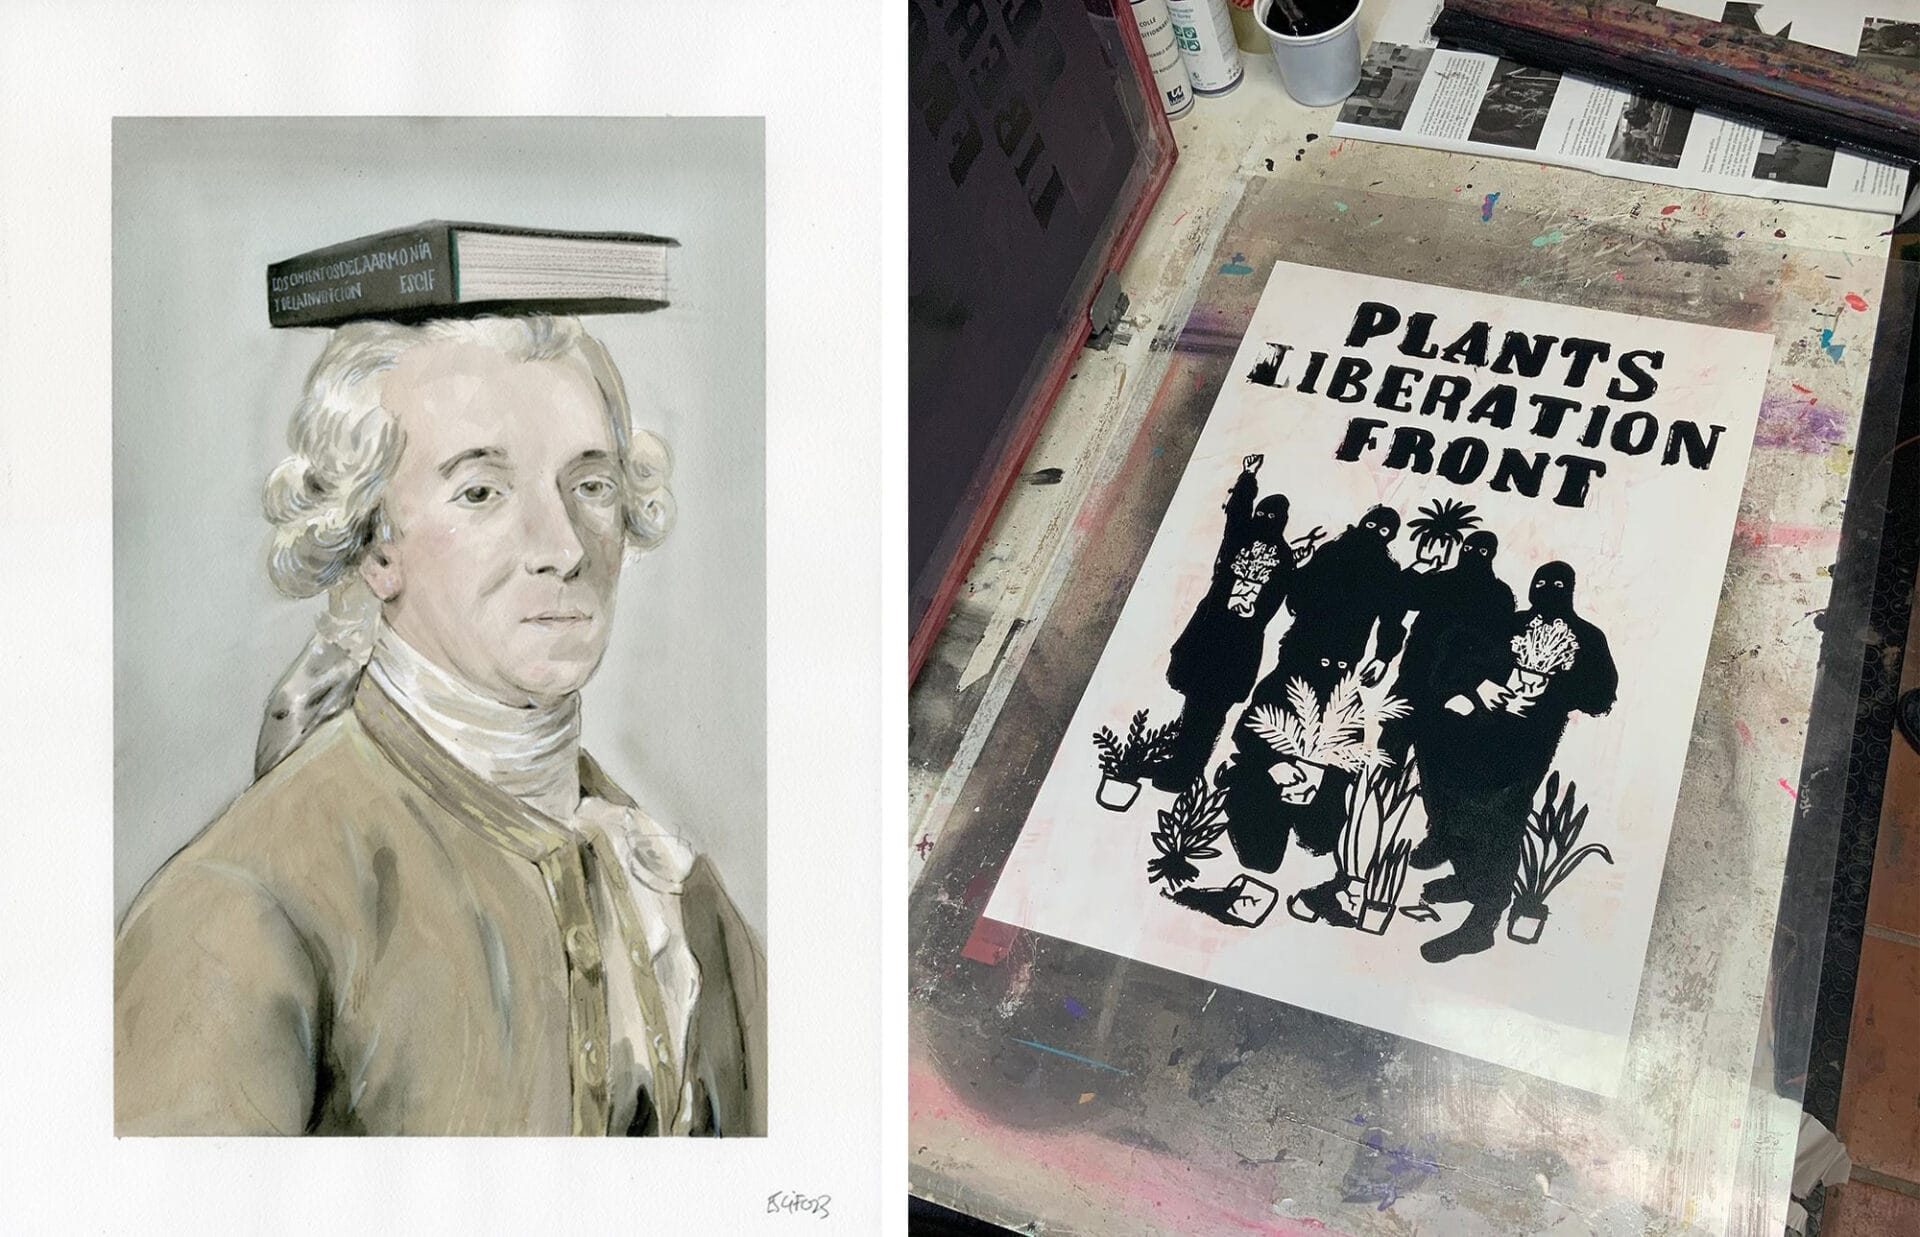 a side-by-side image showing, on the left, a watercolor portrait of an 18th-century man balancing a book on his head, and on the right, a print in a studio with the words 